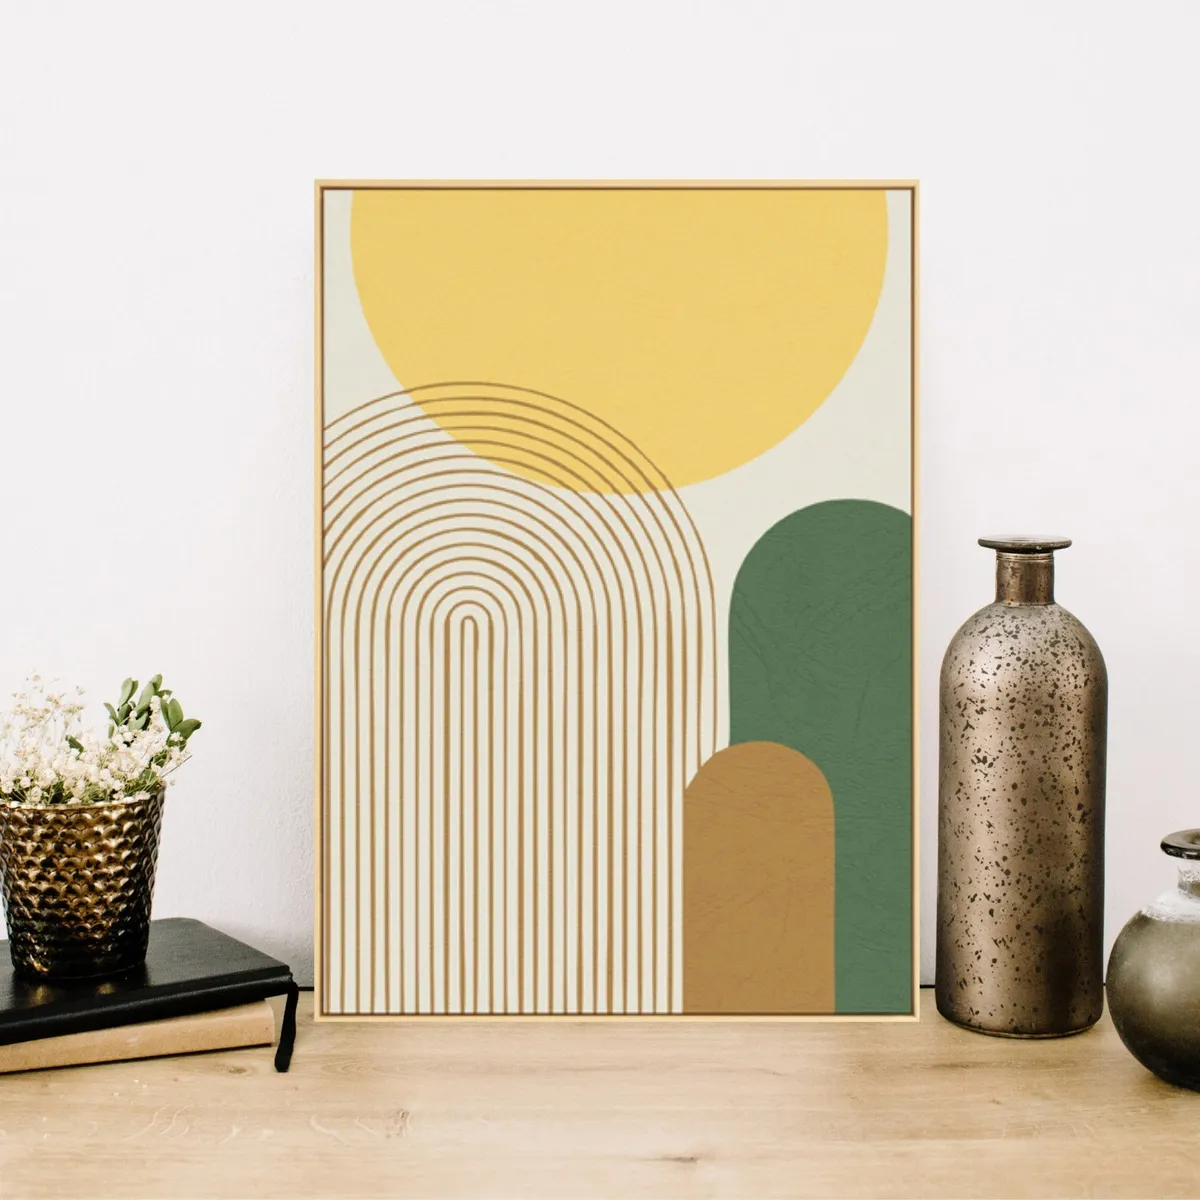 paint by numbers kit with minimalist design